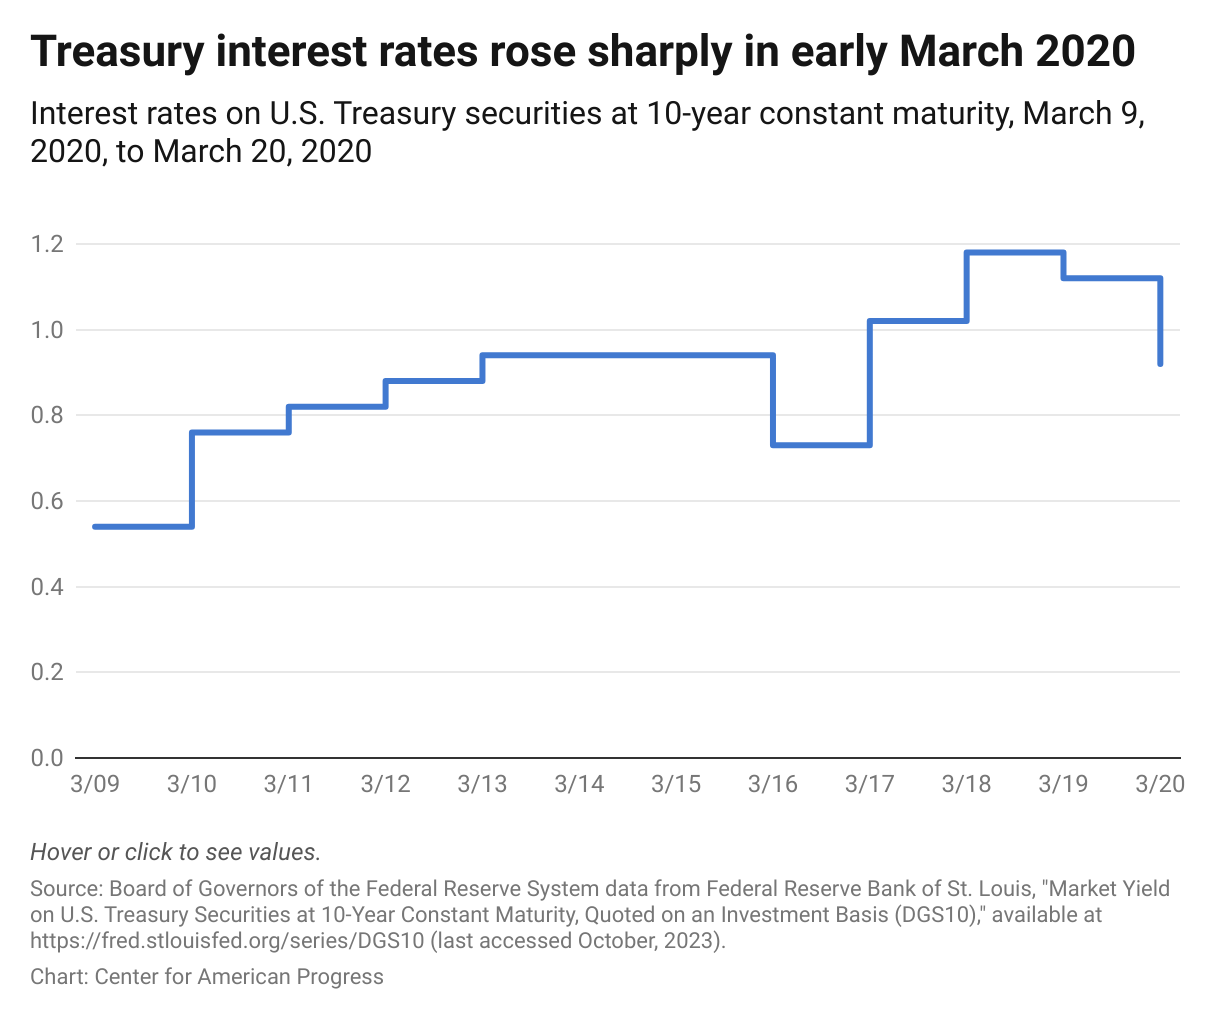 Chart displaying the interest rates on 10-year treasuries, showing that rates more than doubled in a matter of days.